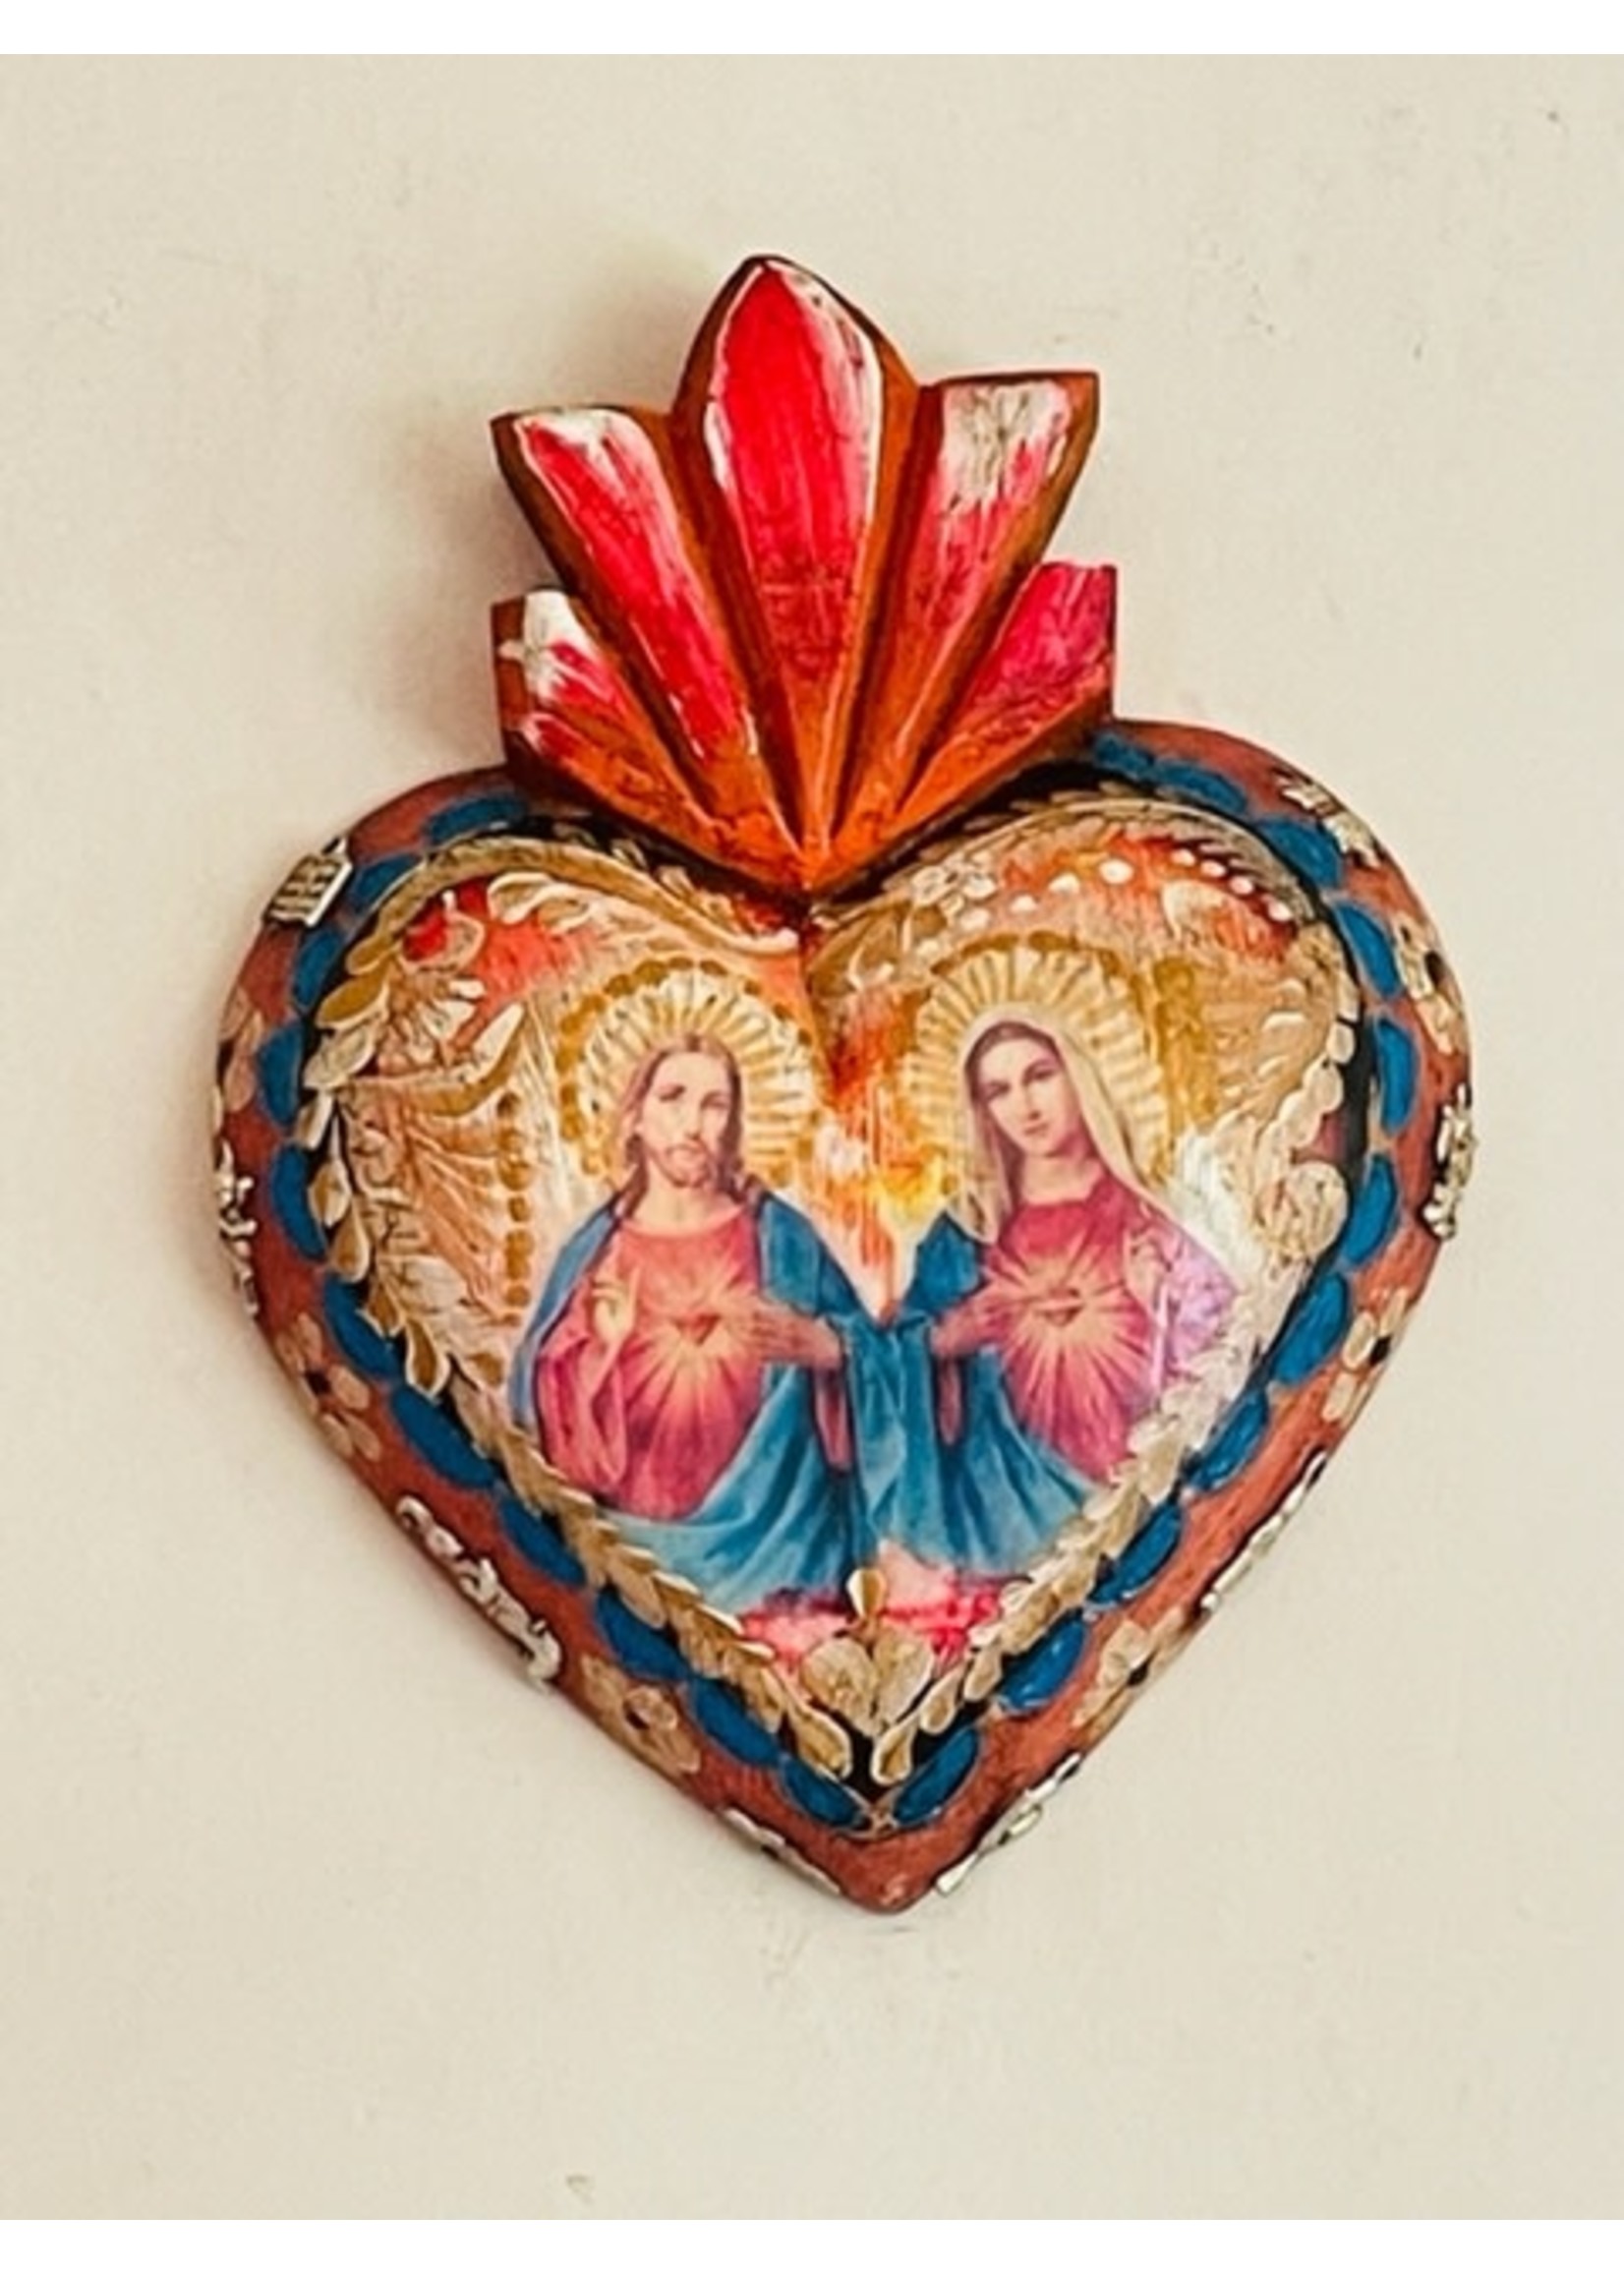 Twin Hearts hand painted wood heart